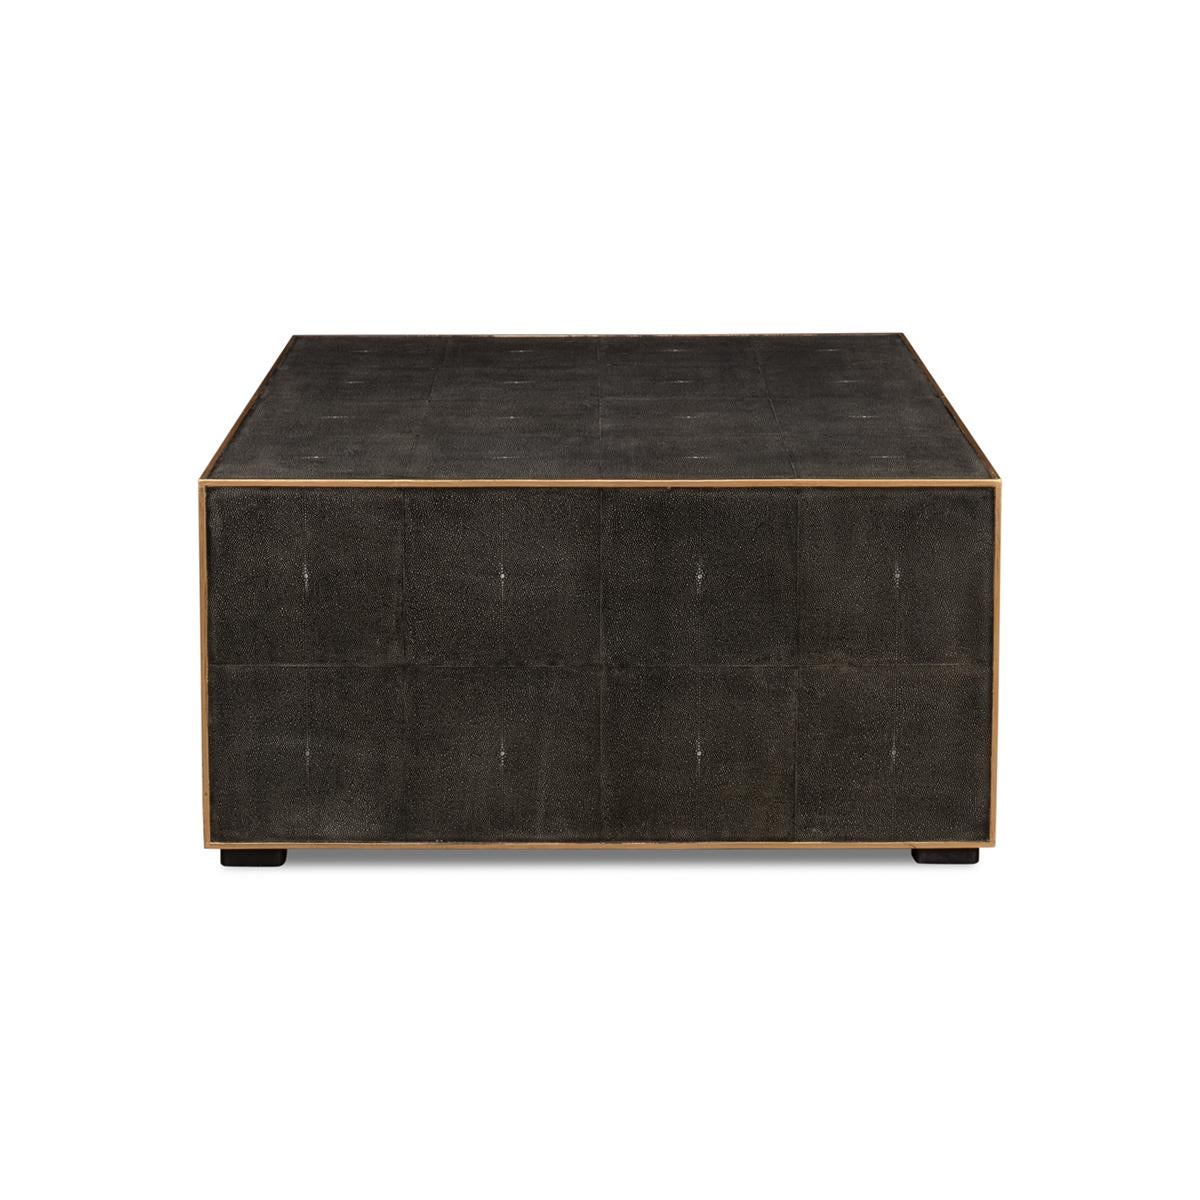 An elegant cube form embossed leather wrapped table in a dark antique gray finish with gold trim.

Dimensions: 36